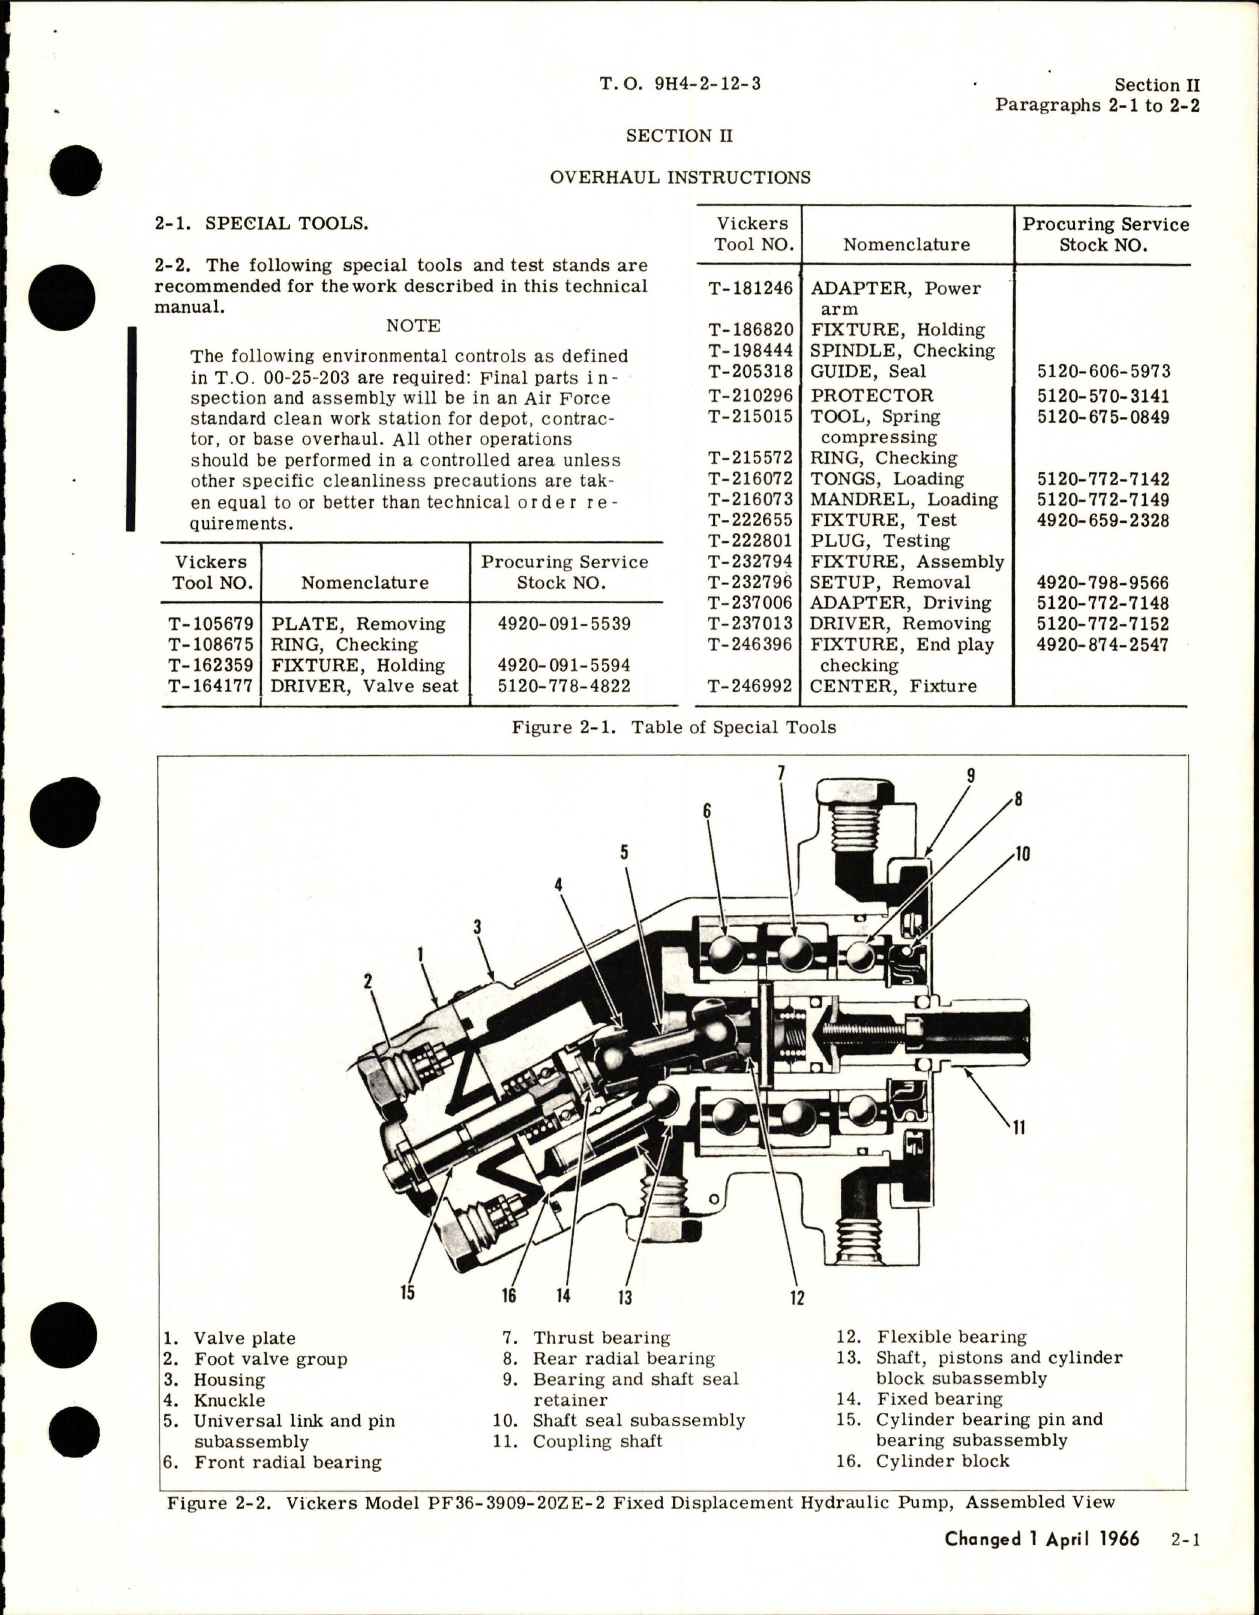 Sample page 7 from AirCorps Library document: Overhaul Manual for Fixed Displacement Hydraulic Pump Assembly - PF-3909-2 Series